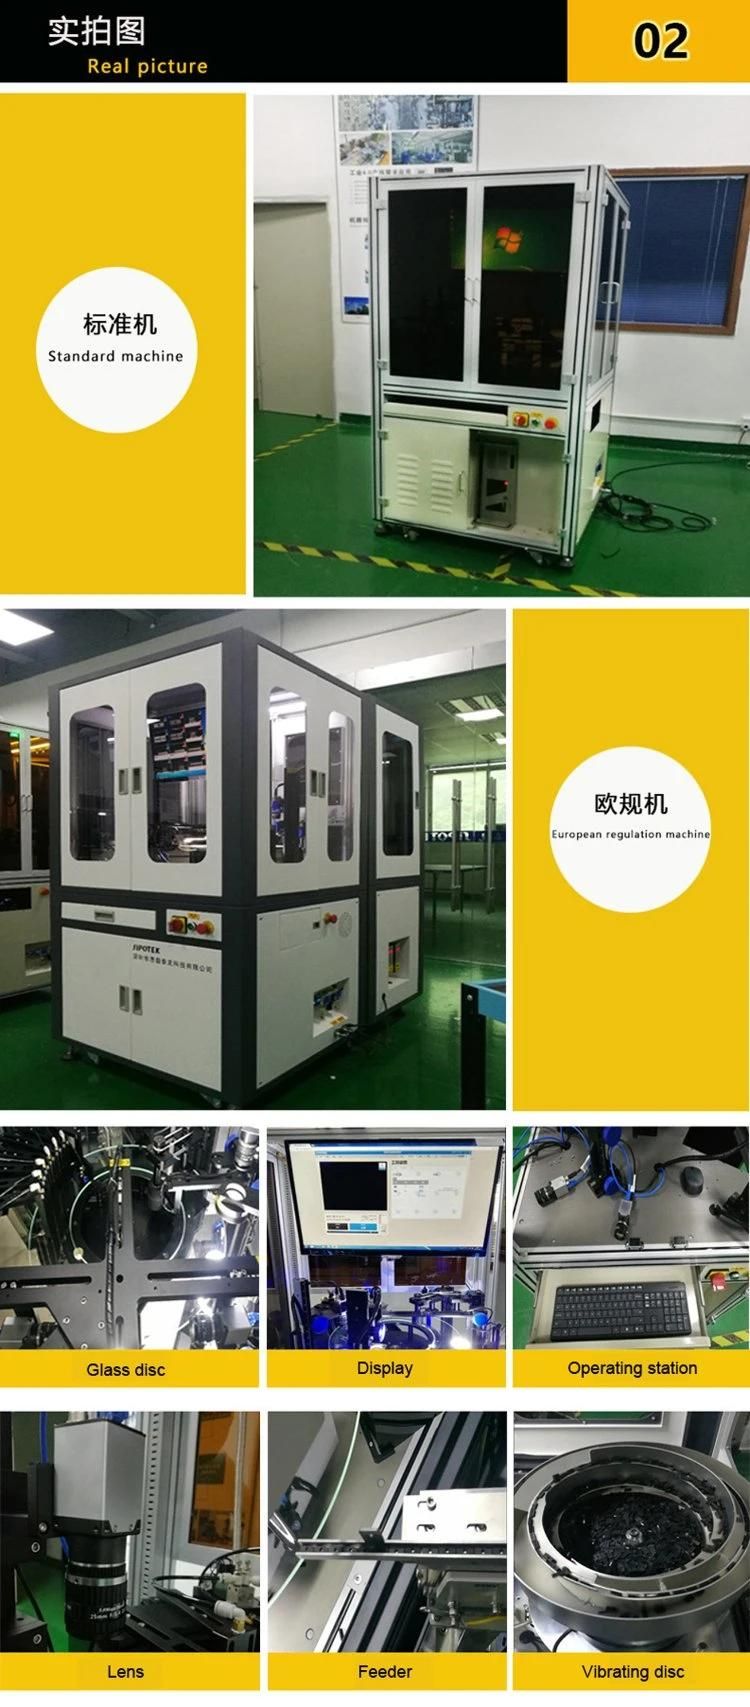 Sipotek Automatic Screw Screening Machine for Loose Thread Inspection